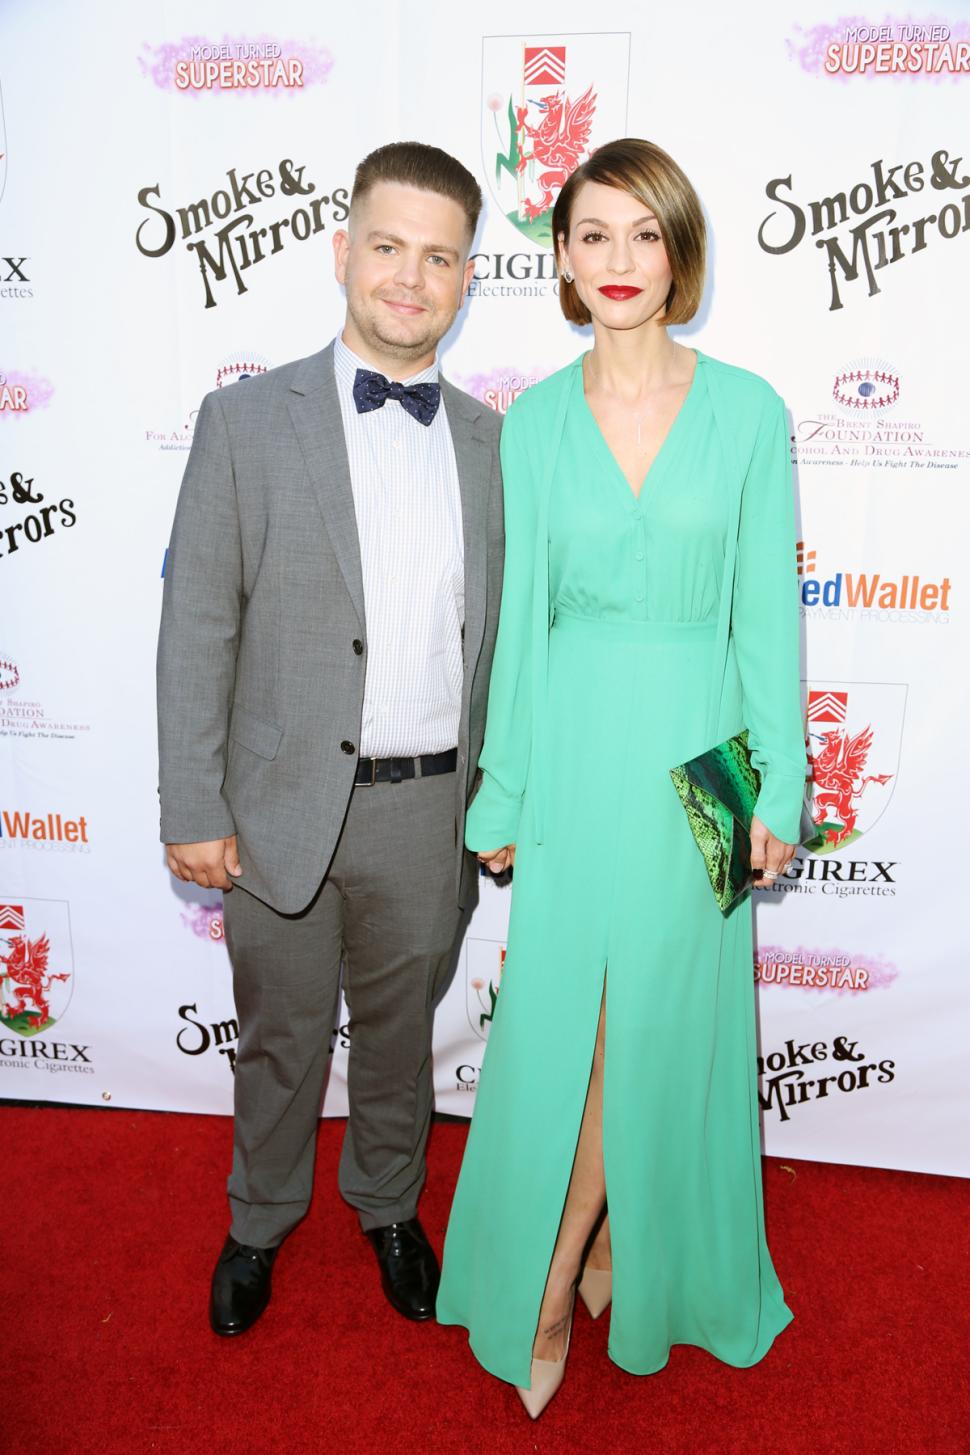 Jack Osbourne and Lisa Stelly at The Brent Shapiro Foundation 2014 Annual Summer Spectacular Under the Stars Gala.